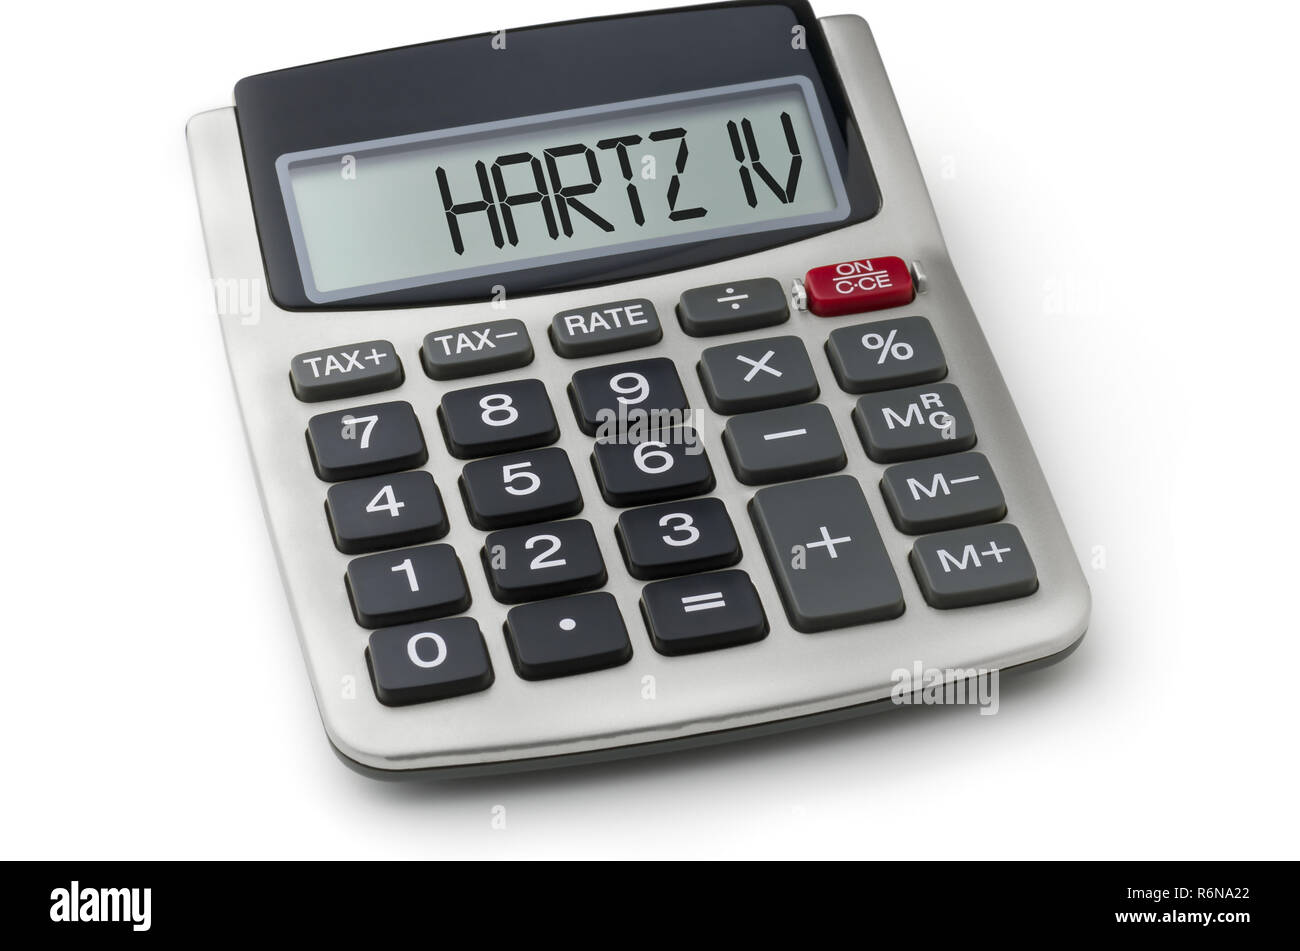 calculator with the word hartz iv in the display Stock Photo